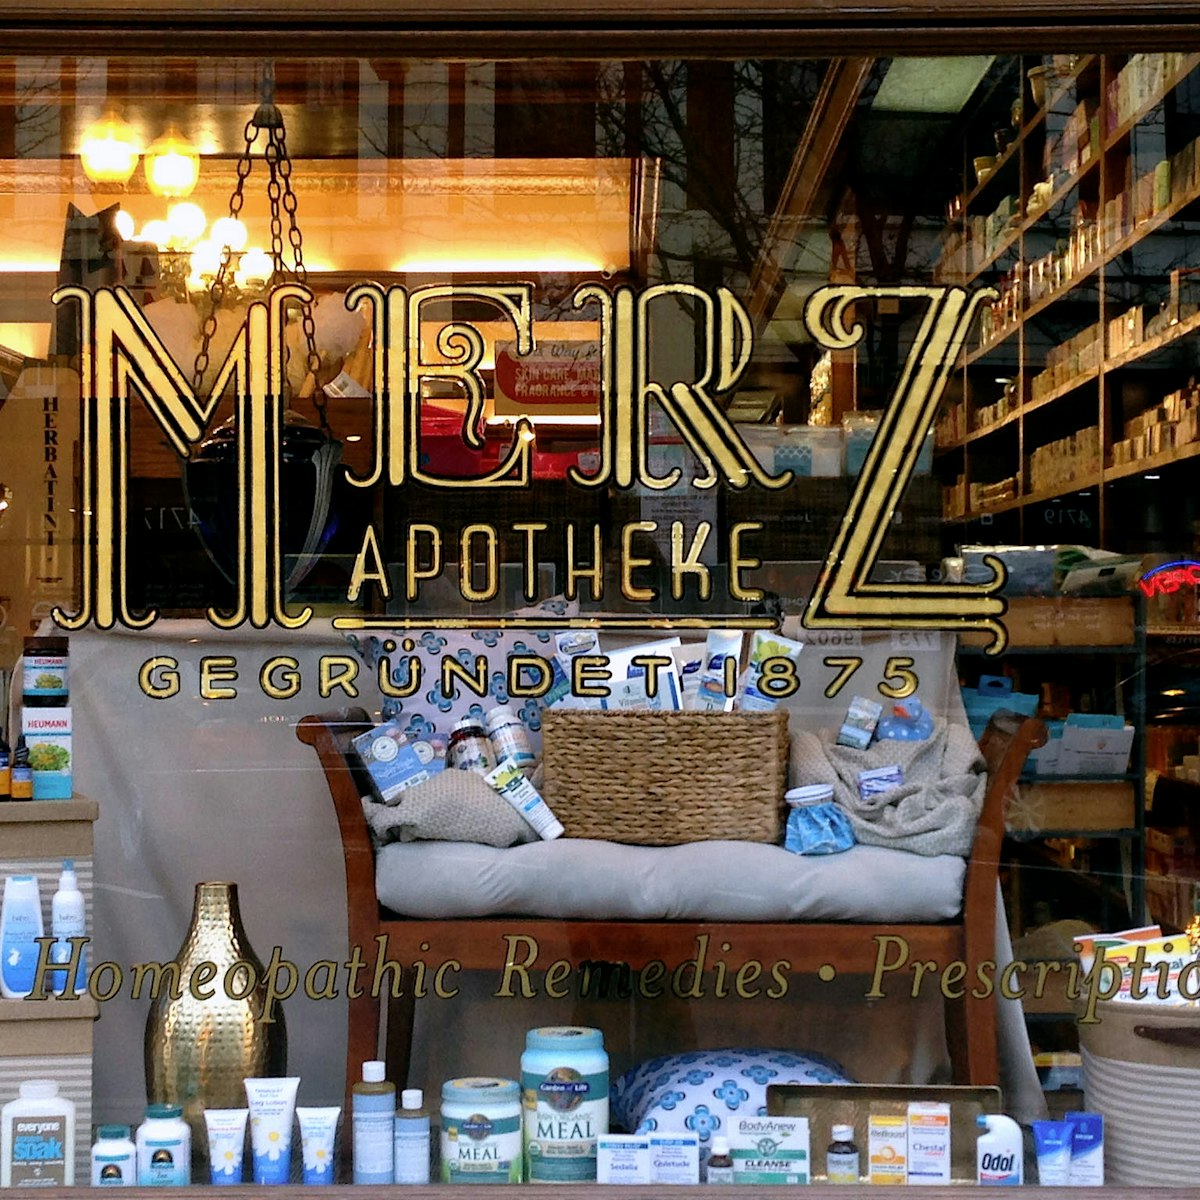 Merz Apothecary in Lincoln Square stocks a variety of natural health and beauty products.